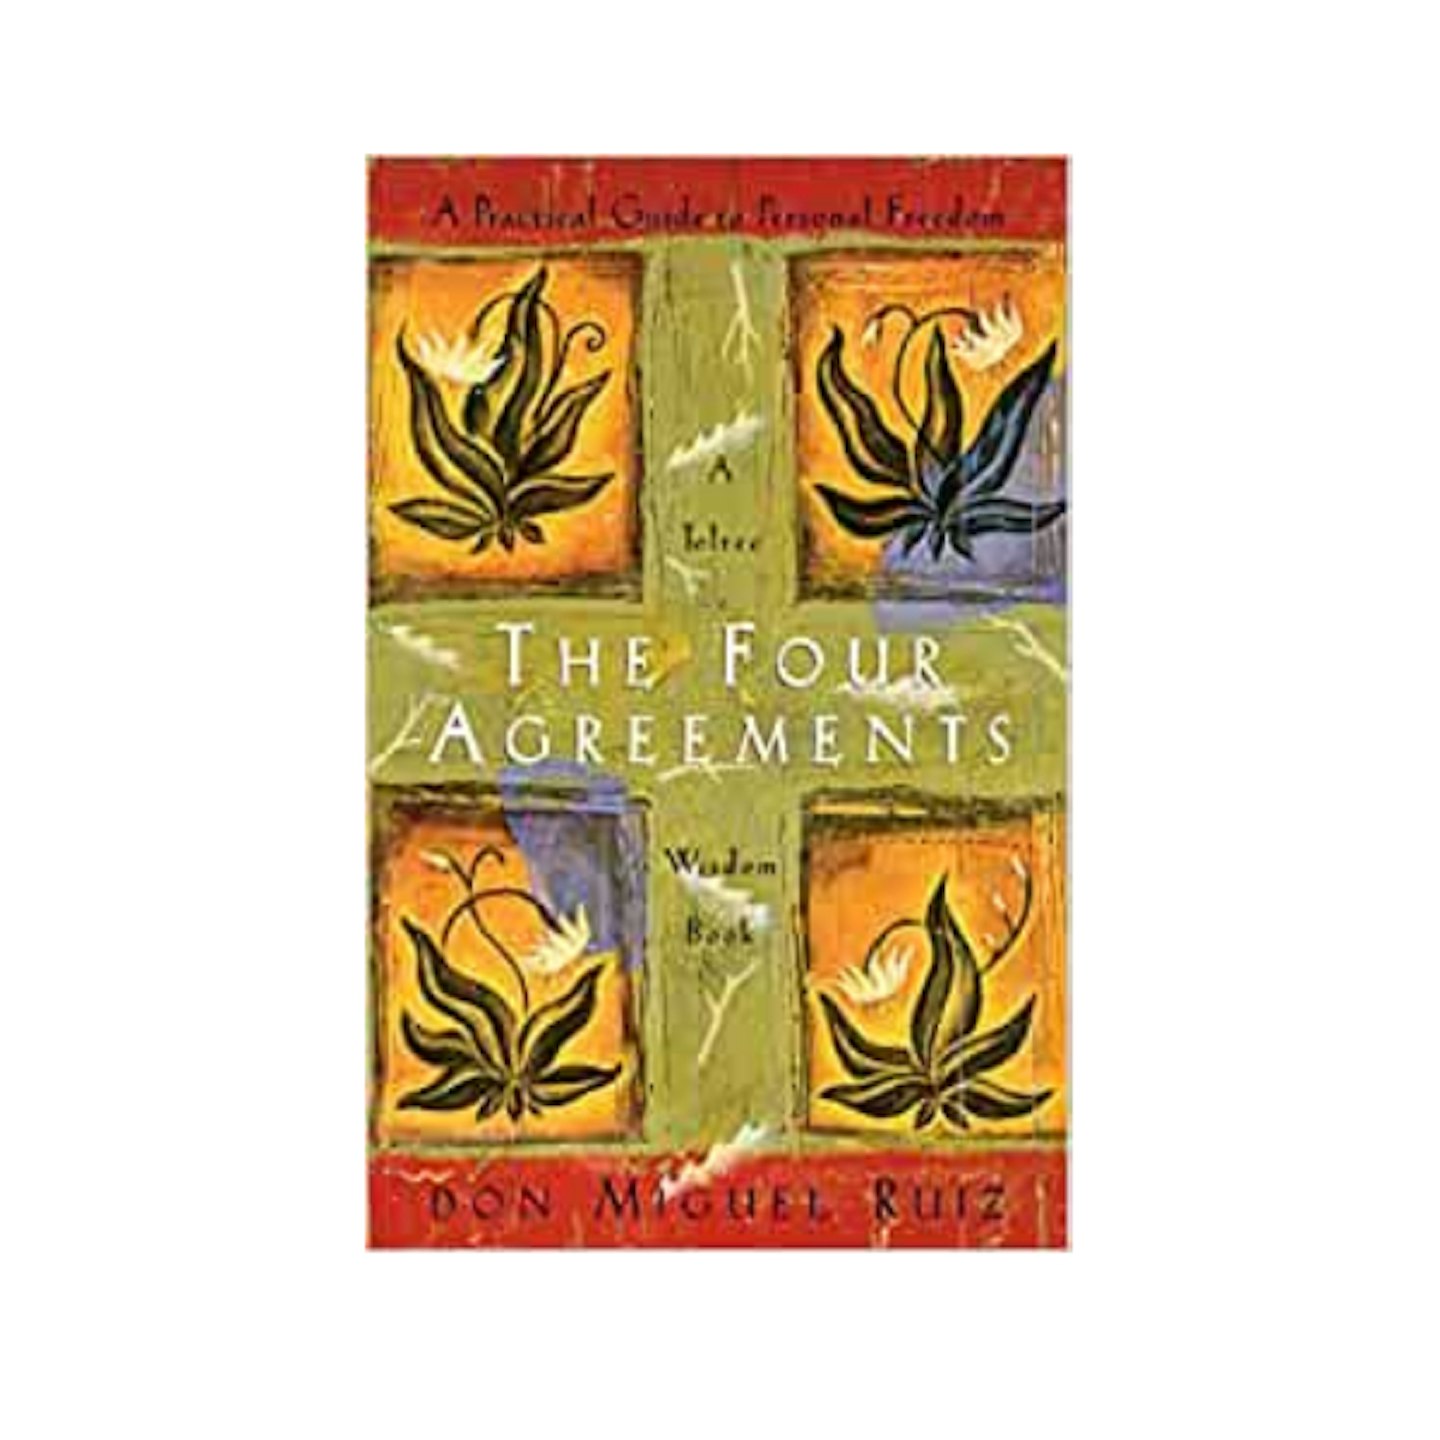 The Four Agreement book cover